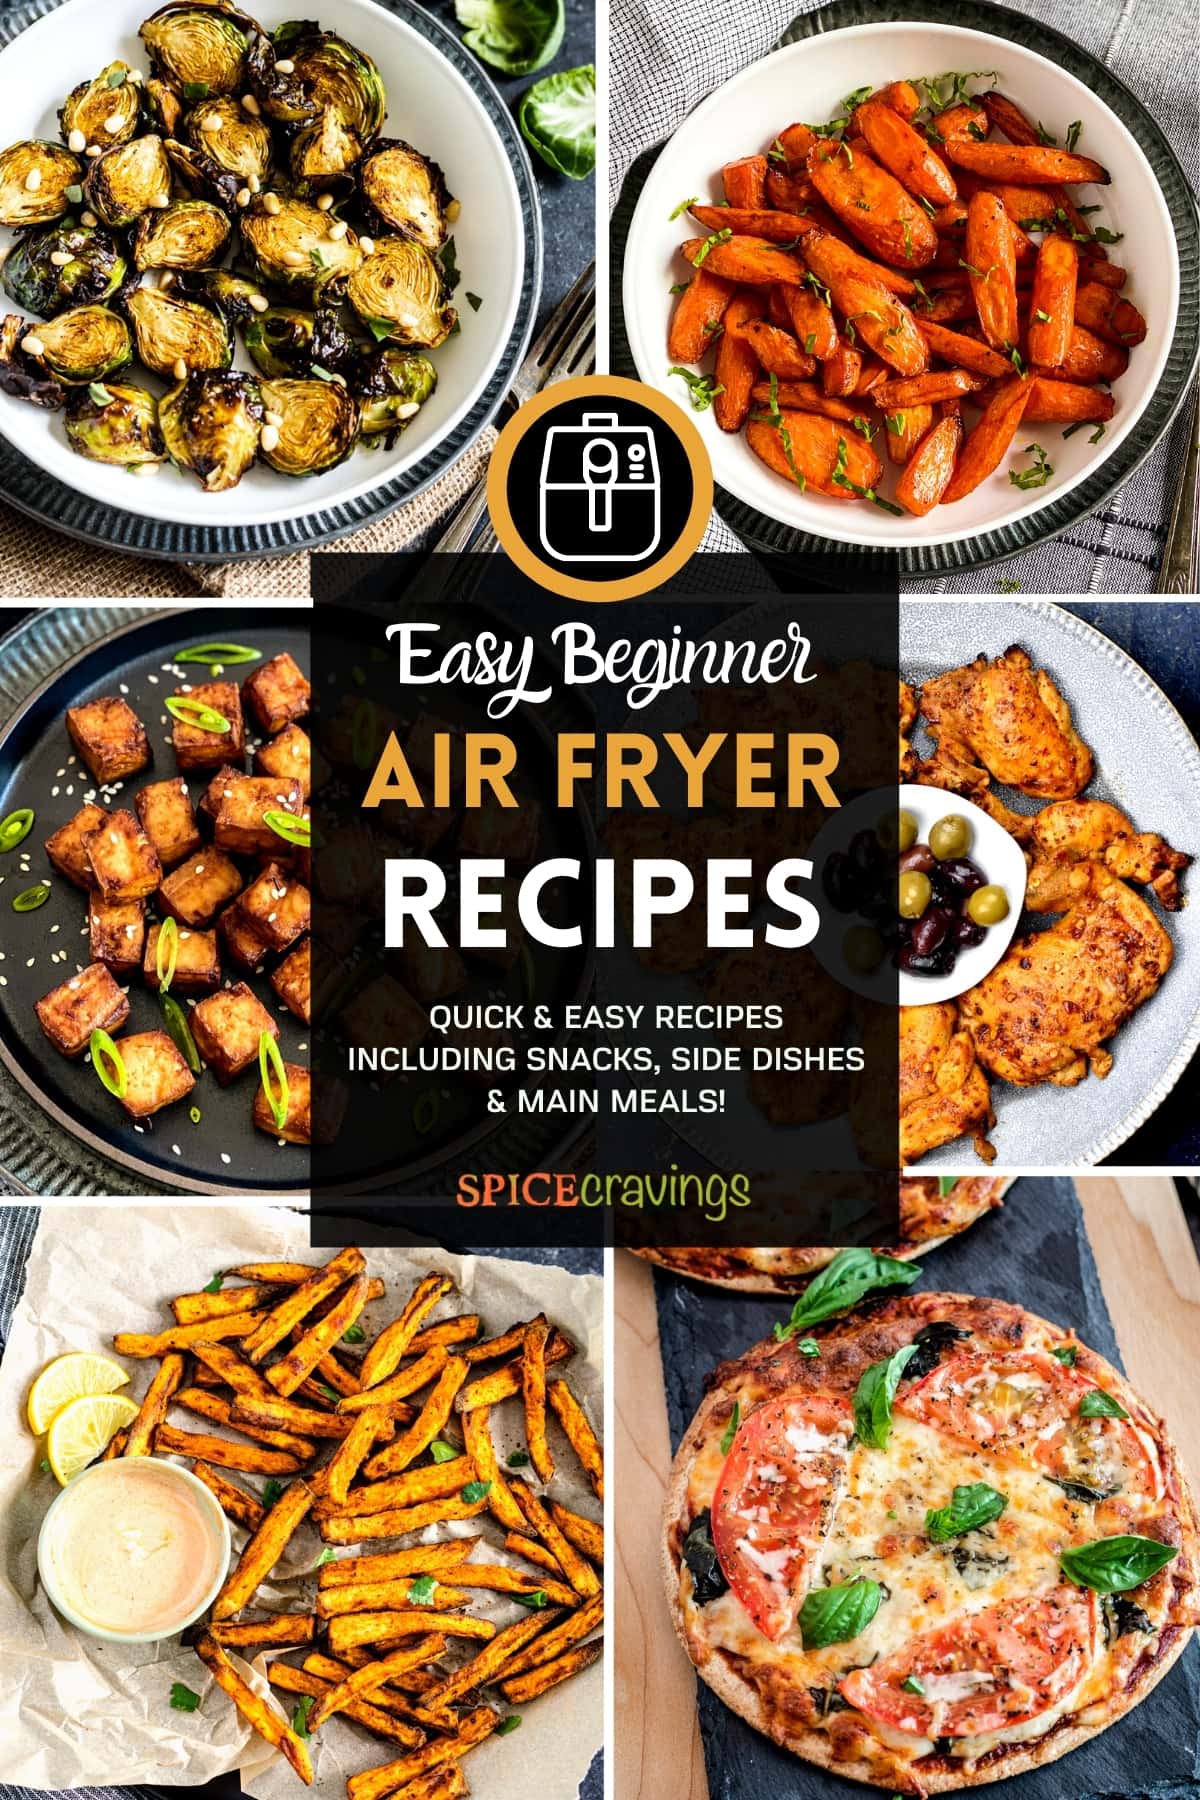 six pictures of air fried food titled "Easy Beginner Air Fryer Recipes. Quick & Easy Recipes Including Snacks, Side Dishes, and Main Meals"